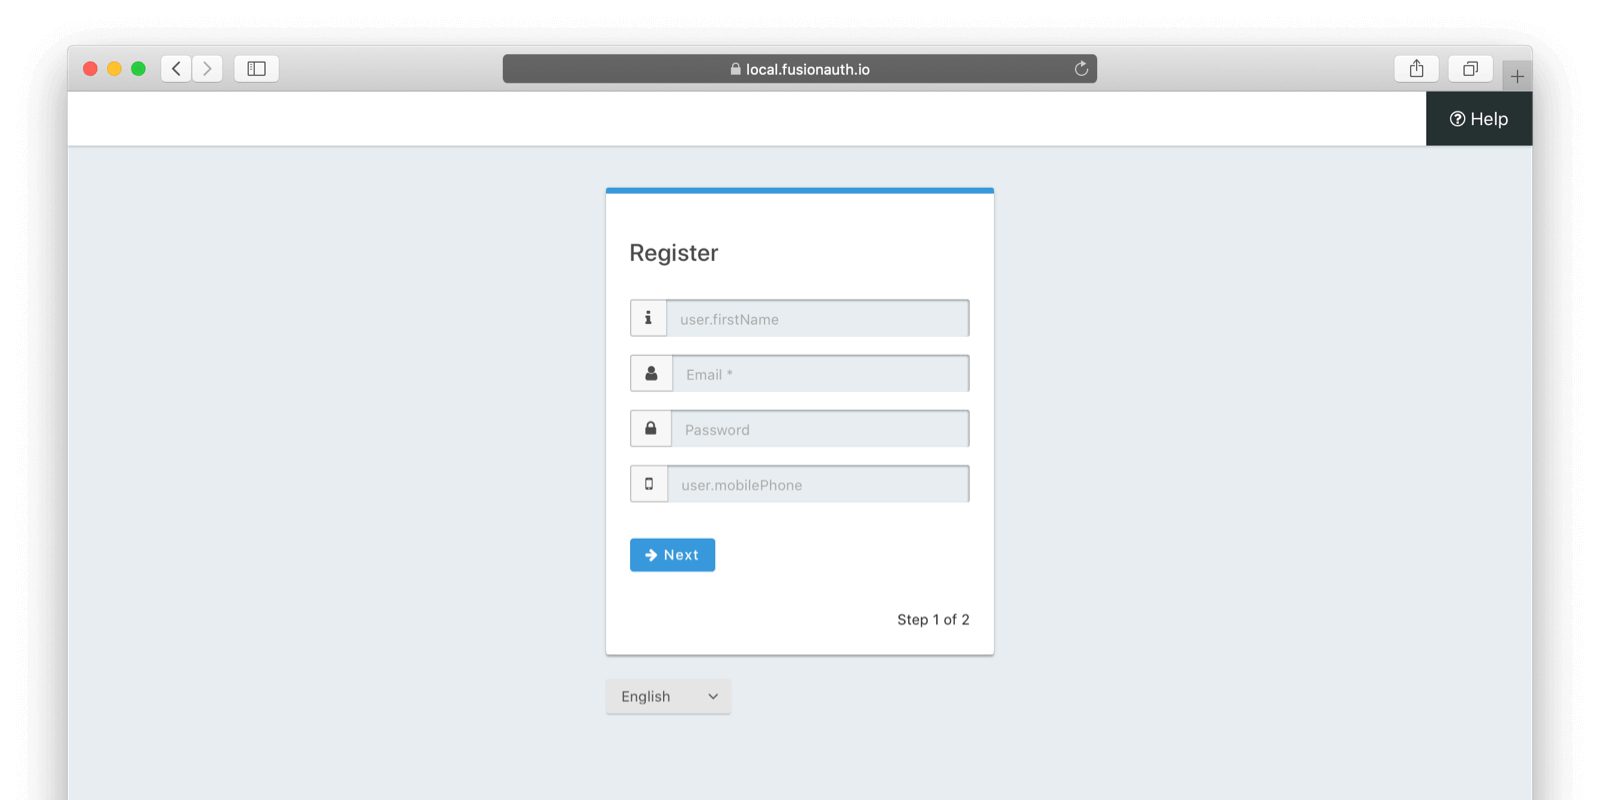 The first page of the custom registration flow.